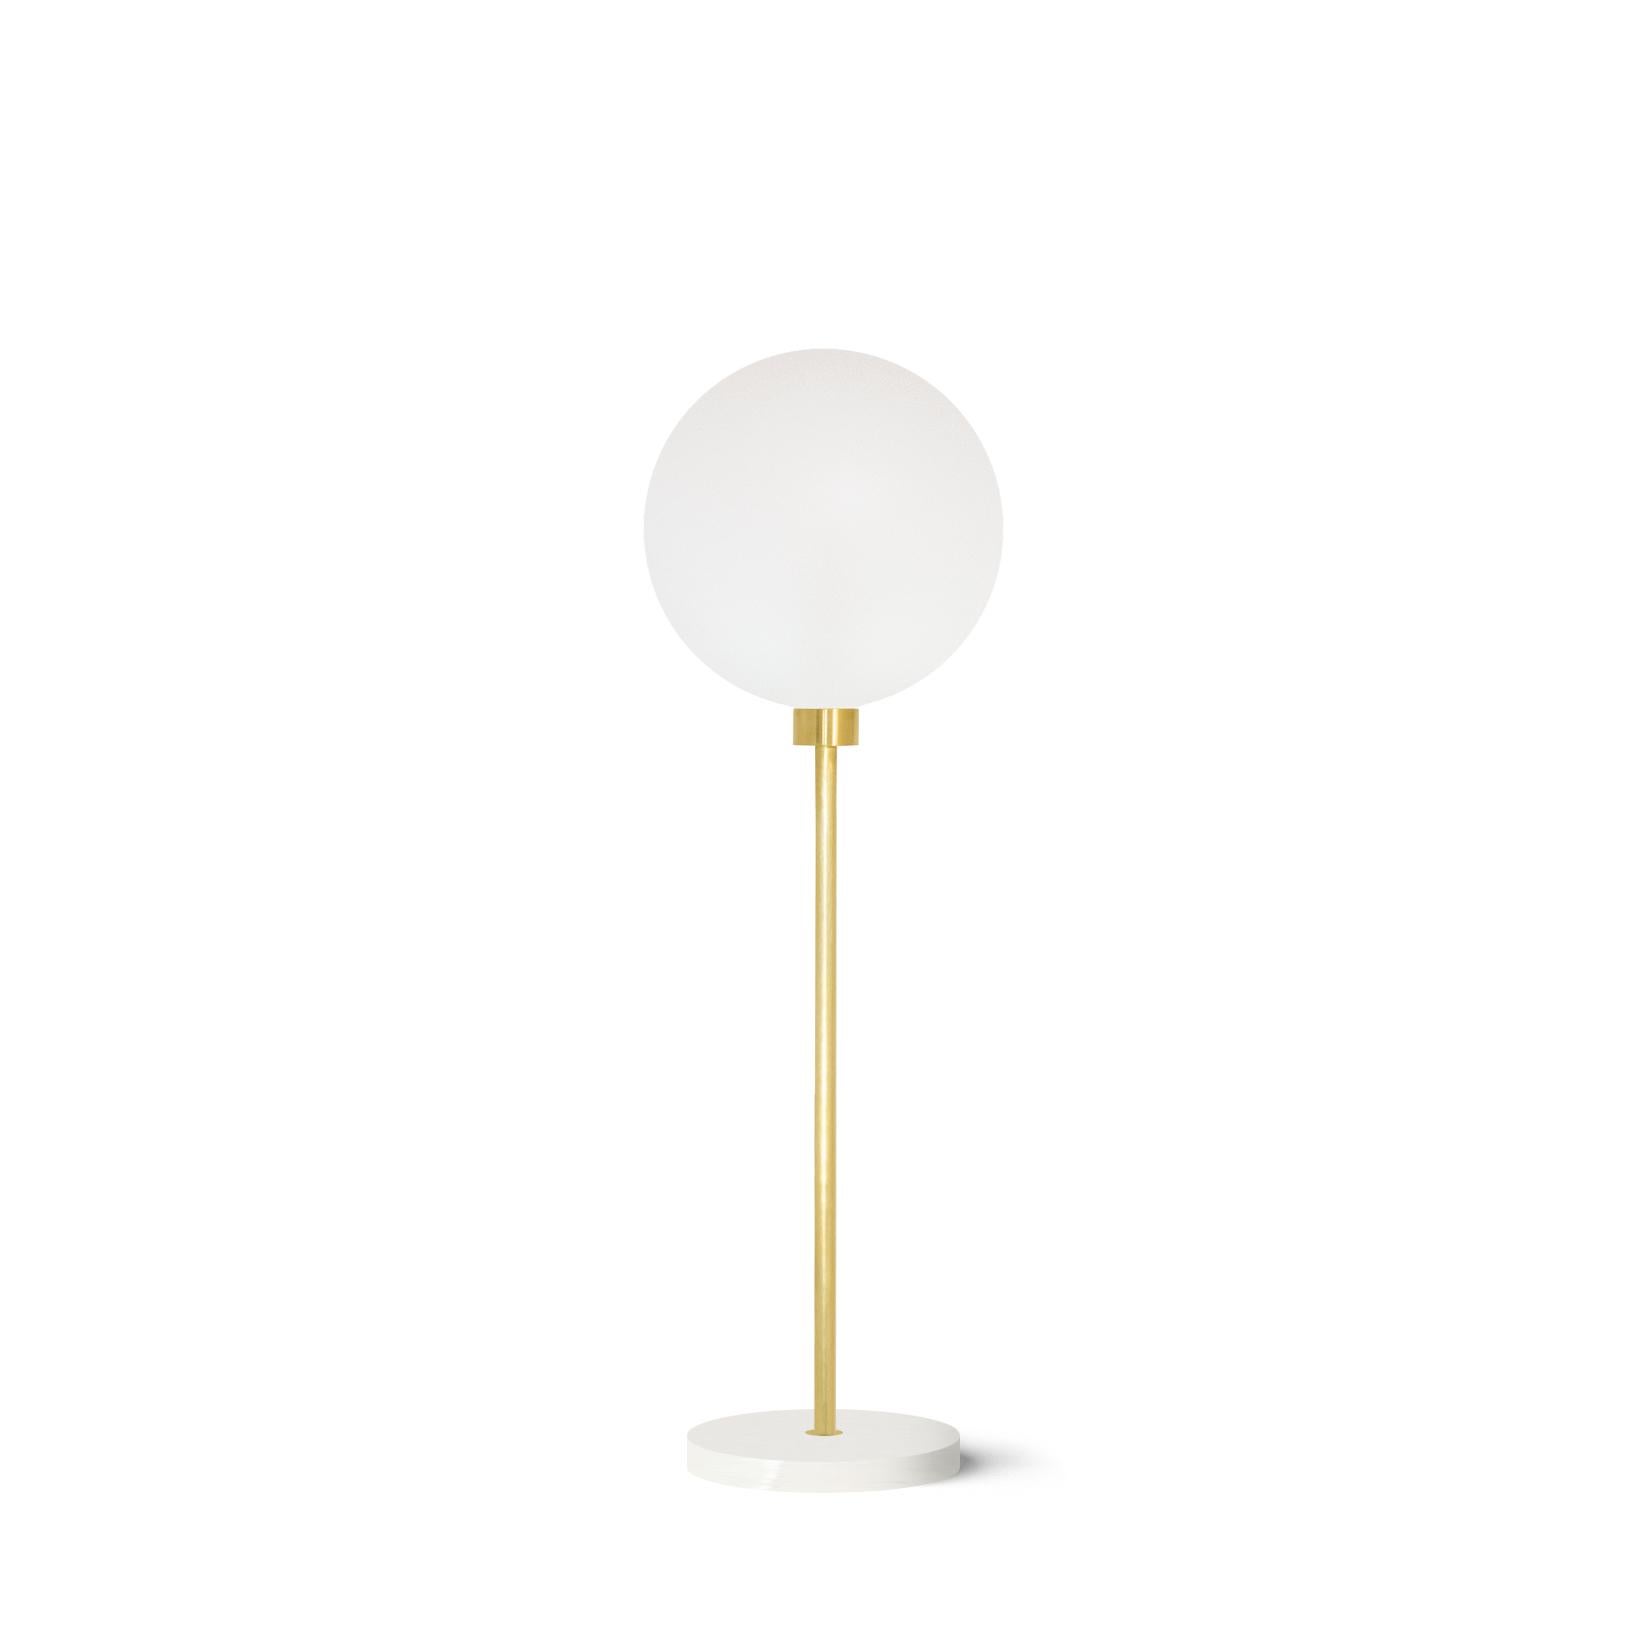 Steel/white marble verti table light by Atris
Materials: steel, white marble, satin glass
Also available in copper and brass.
Dimensions: H 66 x D 20 cm

We are the preachers of honest design, and we like to emphasize the beauty of natural